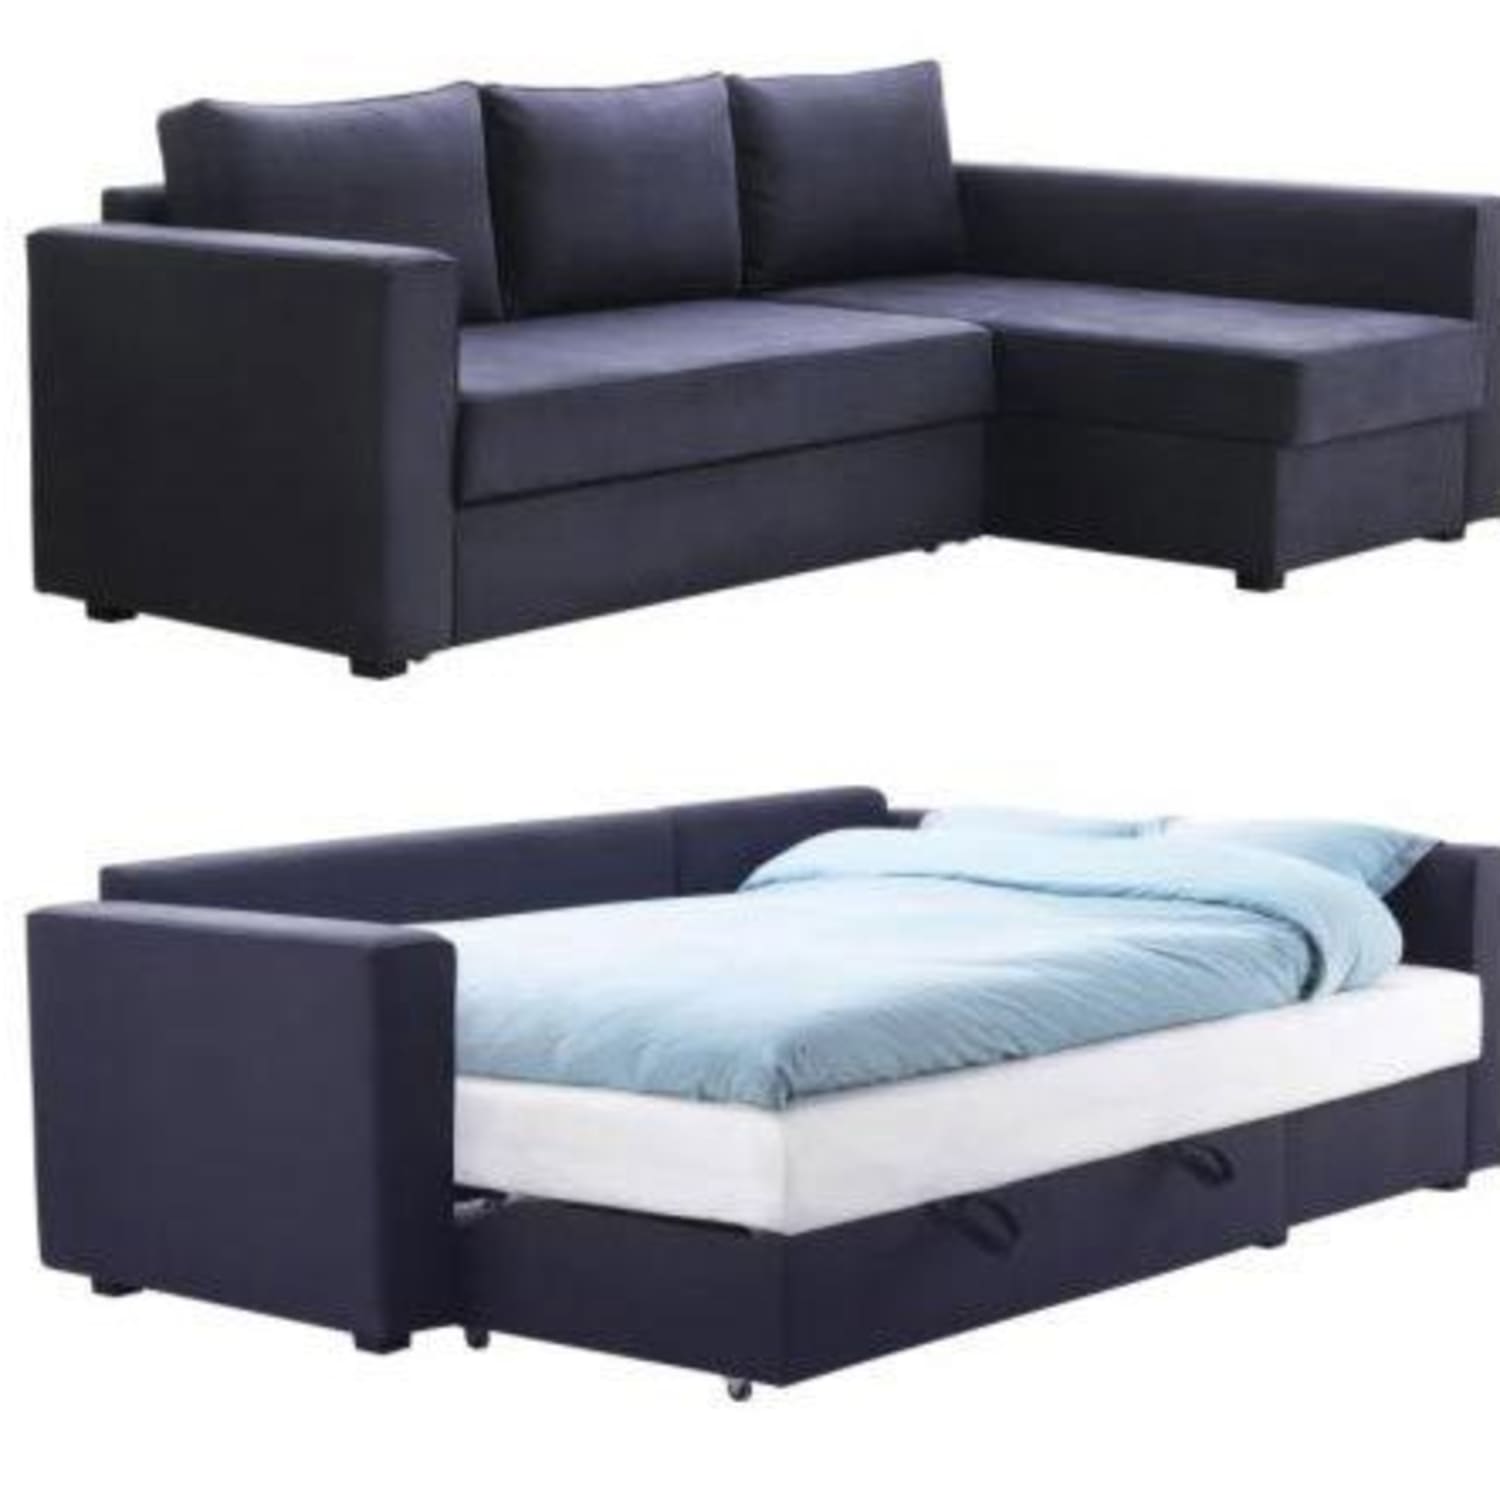 For tidlig Thorns pave MANSTAD Sectional Sofa Bed & Storage from IKEA | Apartment Therapy